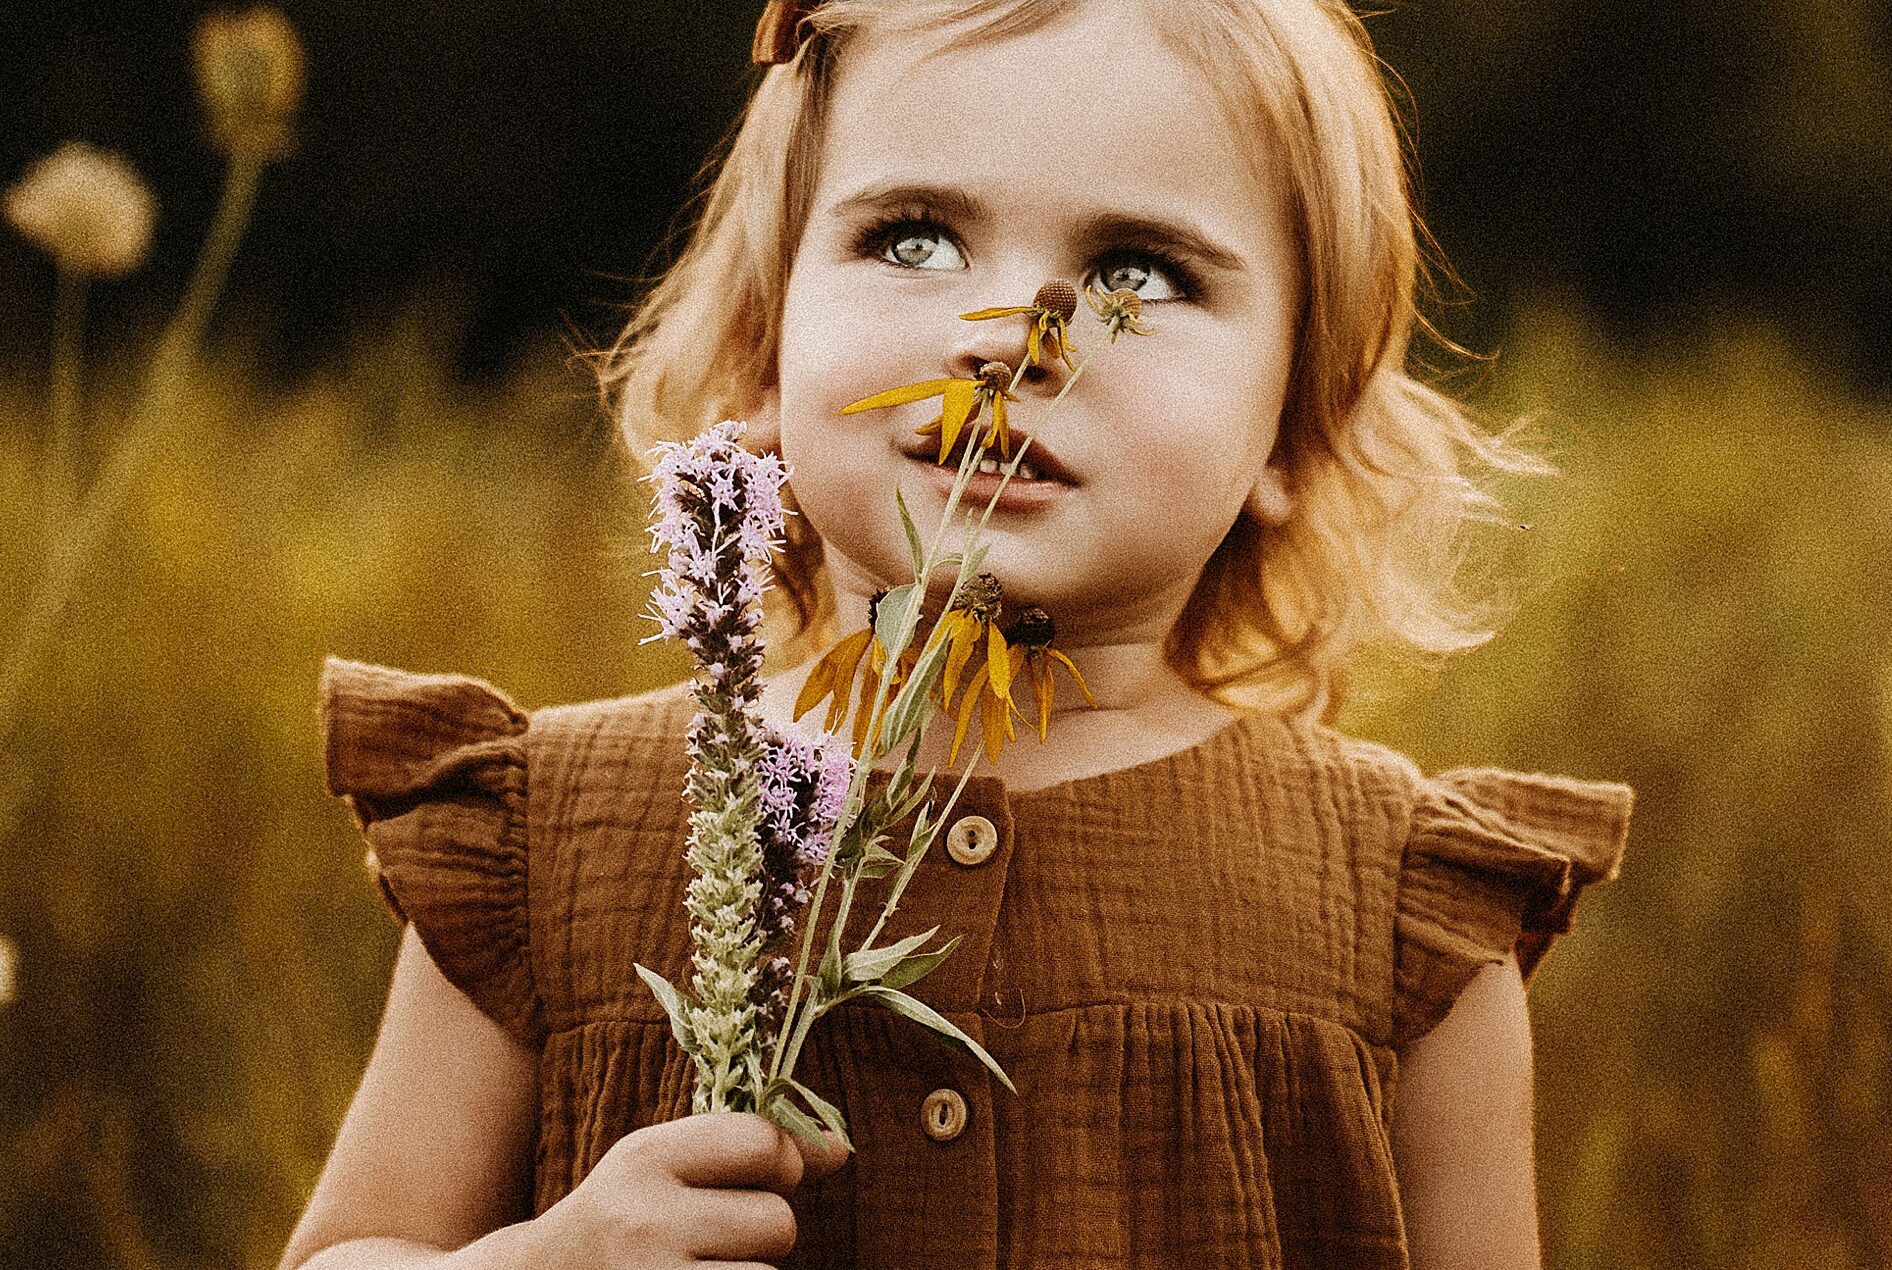 Girl smelling wildflowers during outdoor fun family session fine art childrens portraits Missouri